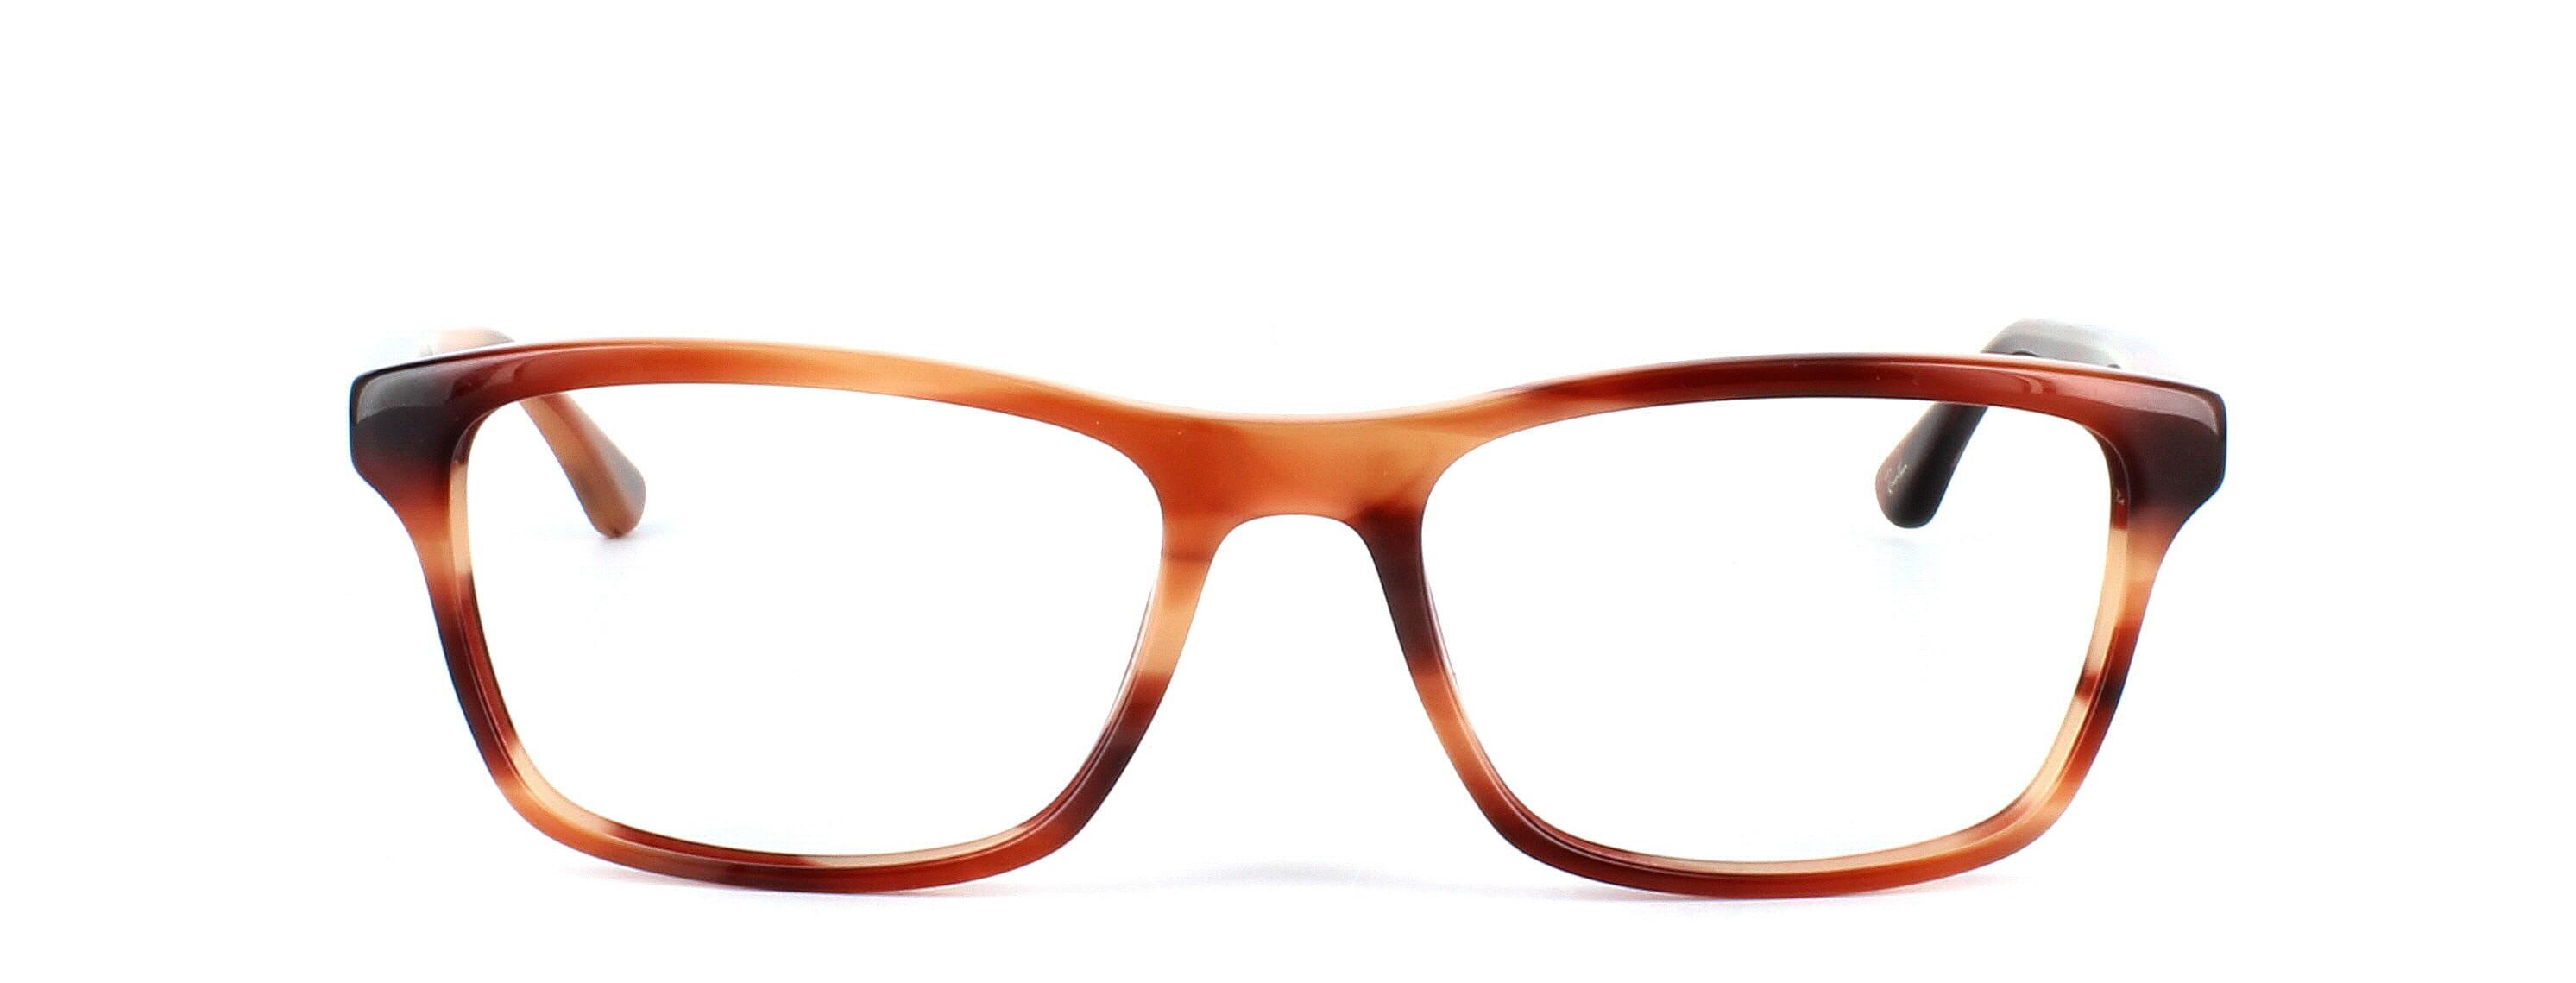 Unisex acetate glasses by Ray Ban. Model 5279 5774 - mottled brown - image view 2